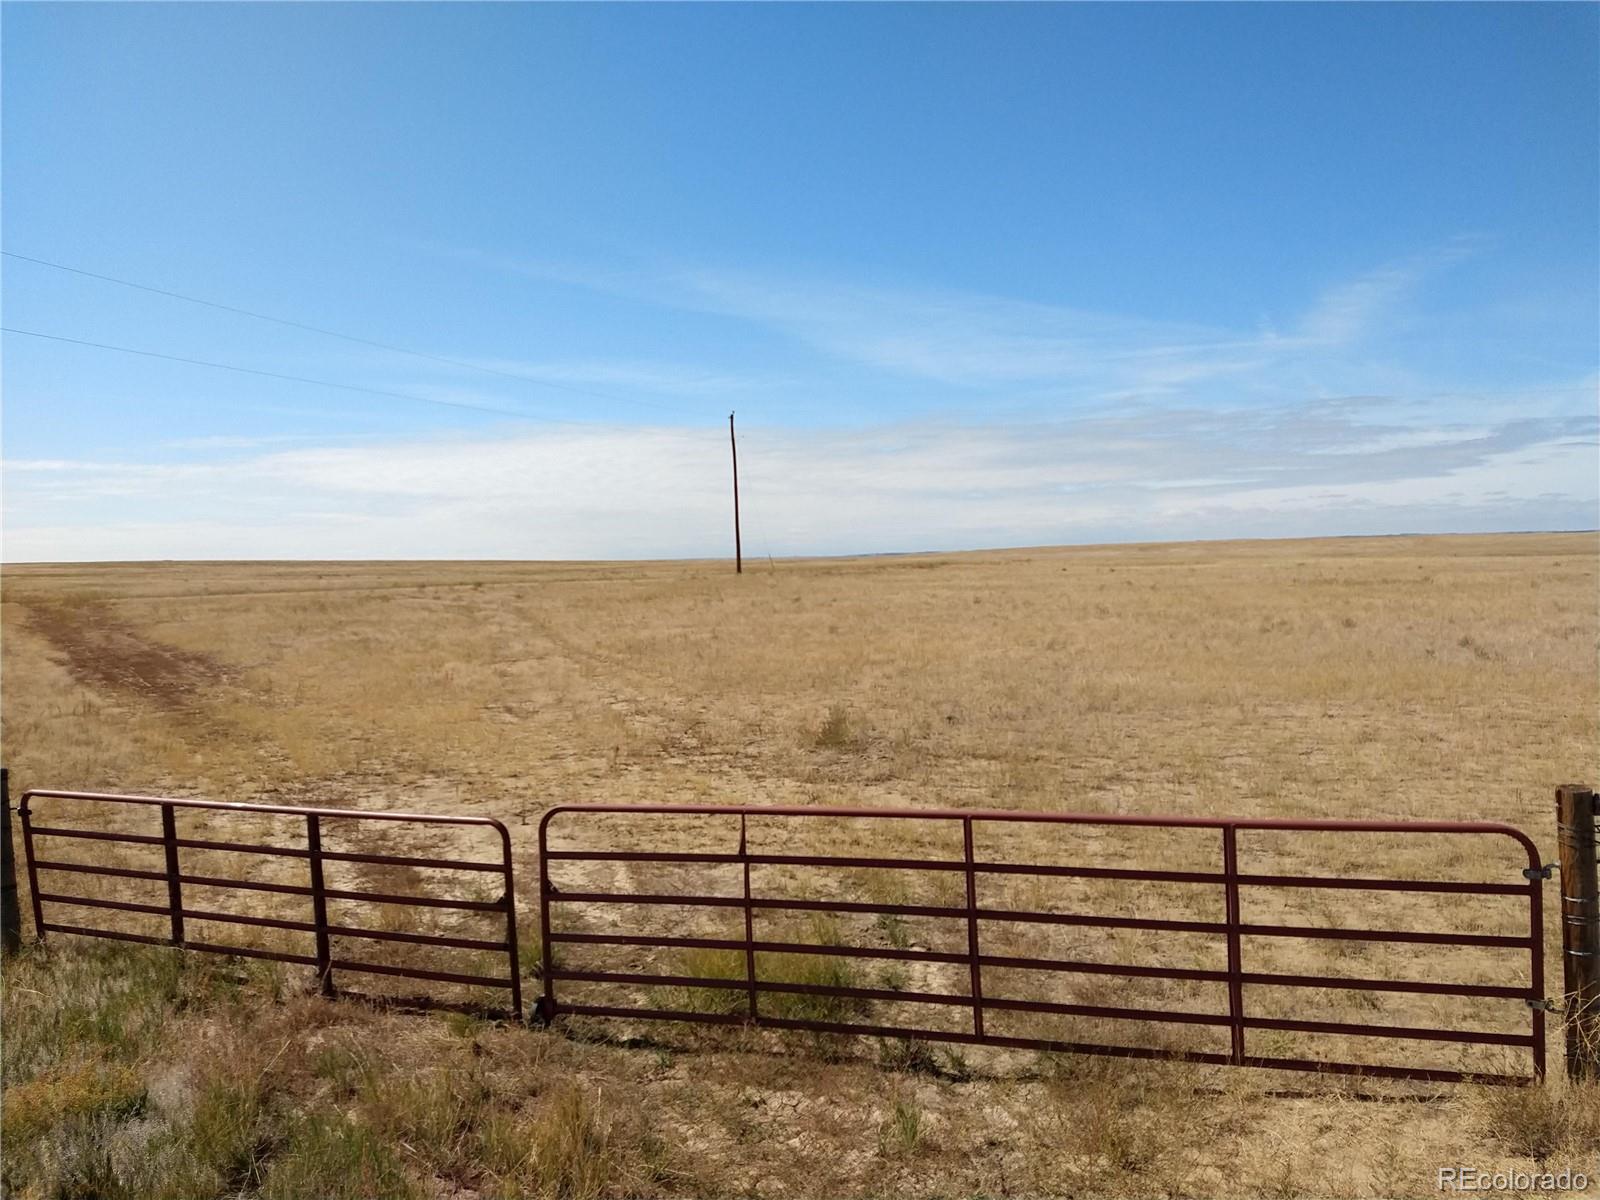  County Road 160 (Parcel 12), Agate, CO